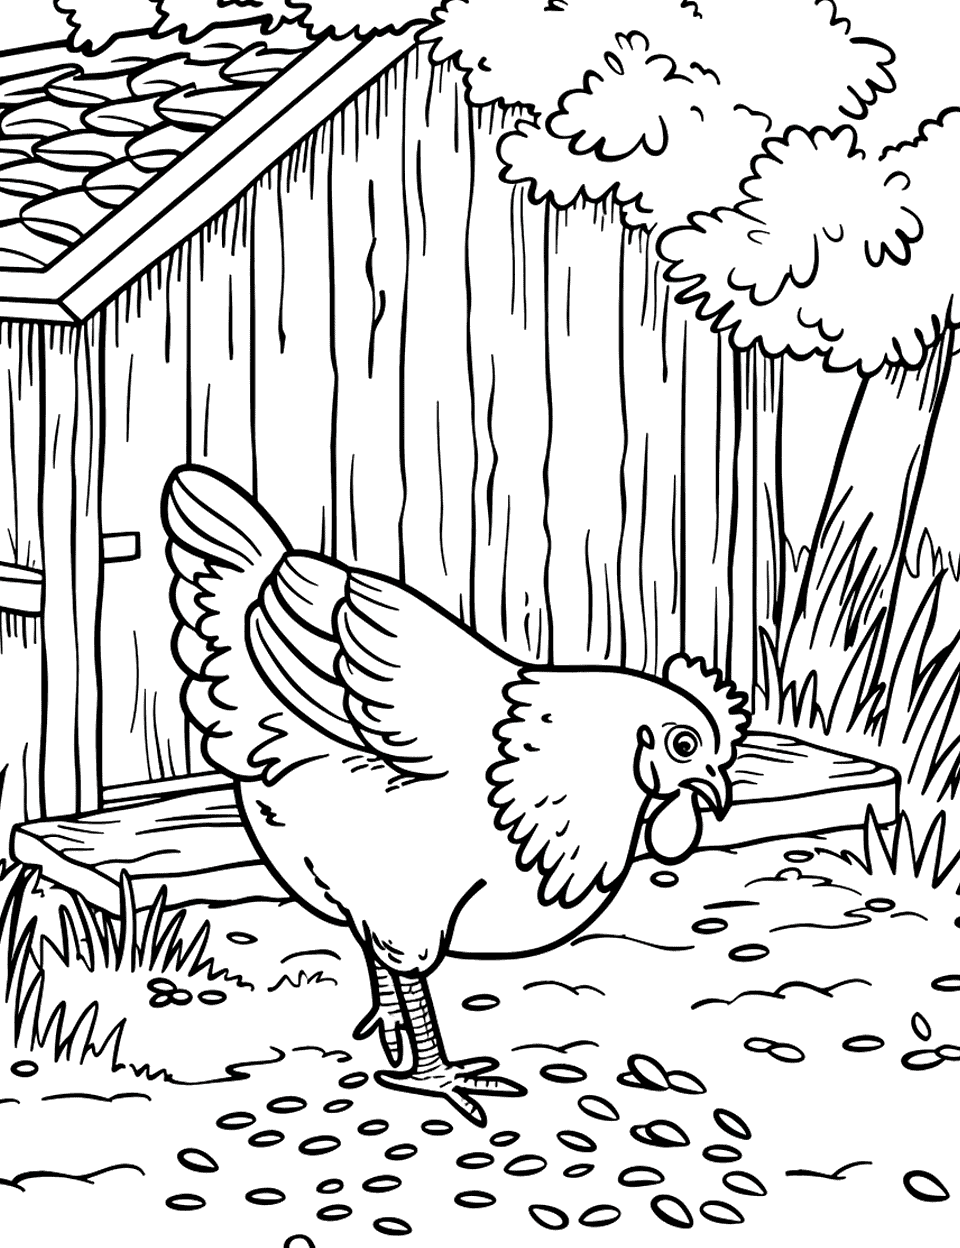 Chicken Pecking at the Ground Farm Animal Coloring Page - A chicken pecking at seeds scattered on the ground near a simple wooden coop.